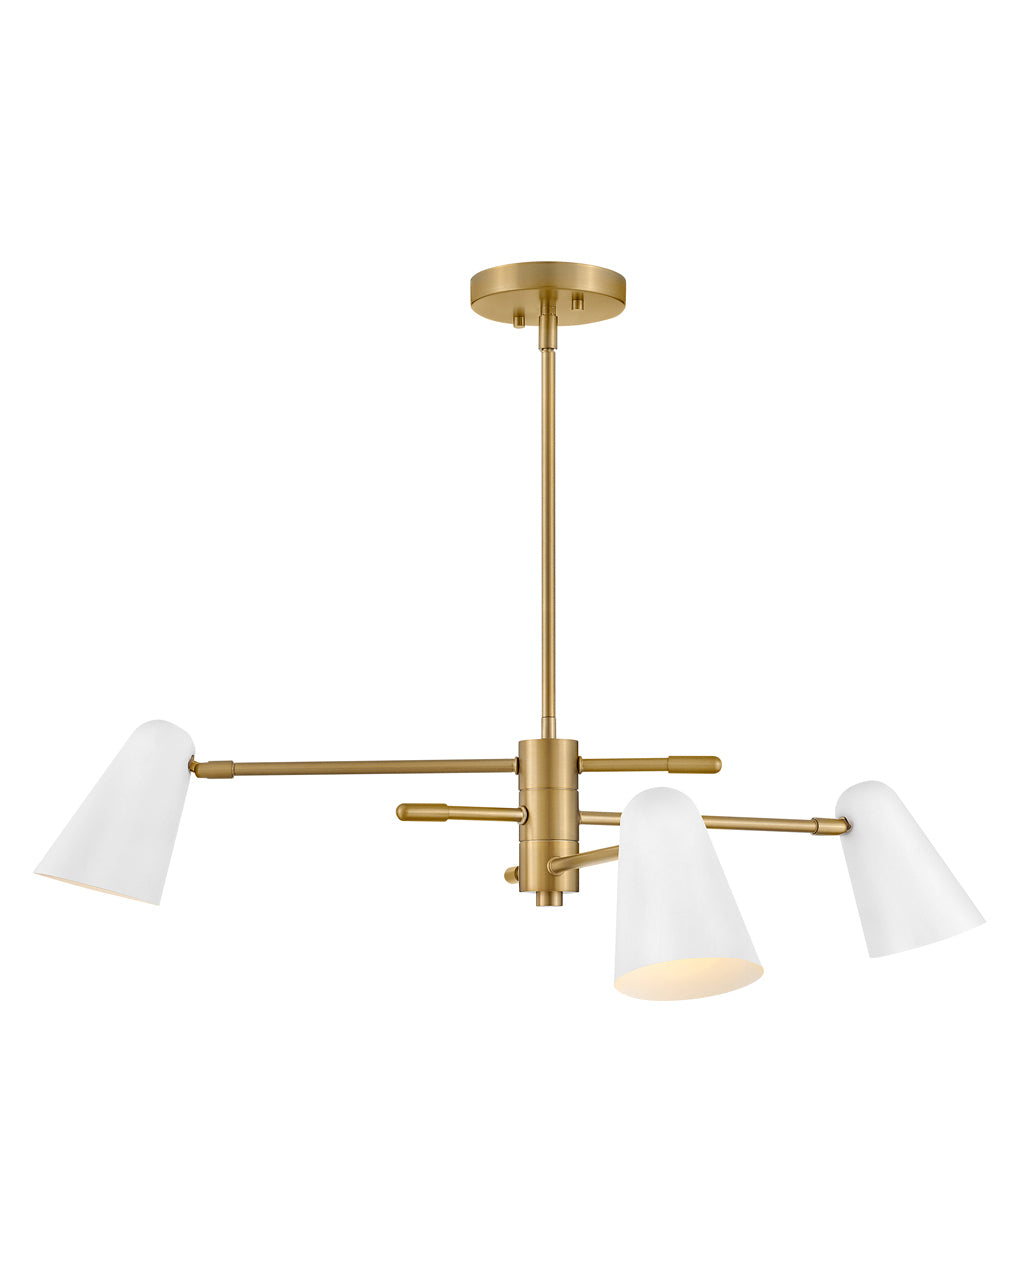 Lark Birdie Three Light Convertible Mobile Single Tier Chandeliers Lark 30.0x30.0x10.25 Lacquered Brass with Matte White accents 